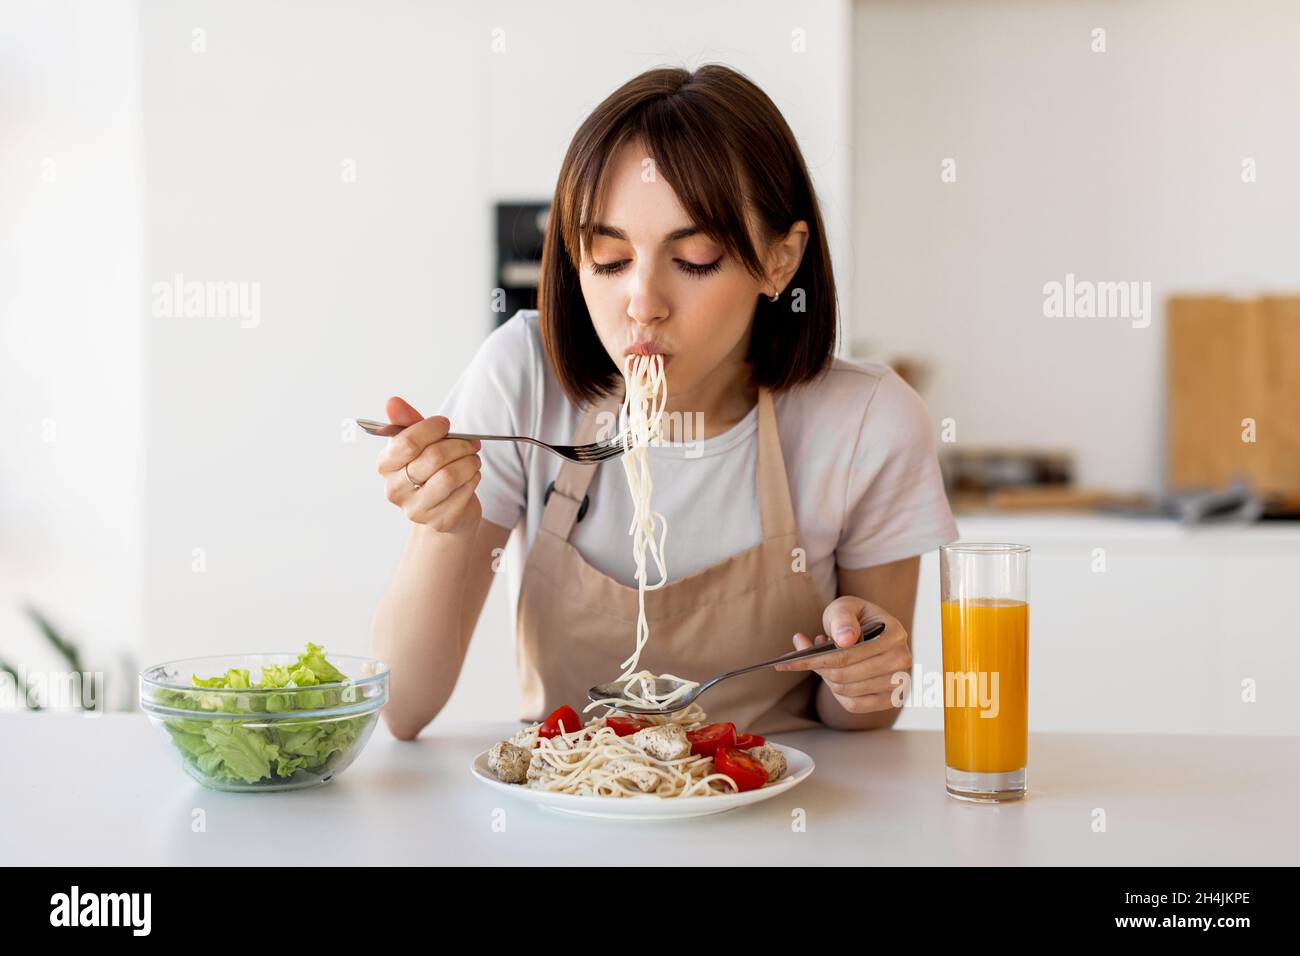 Young housewife tasting spaghetti and vegetable salad, enjoying delicious lunch at home, sitting in modern kitchen Stock Photo